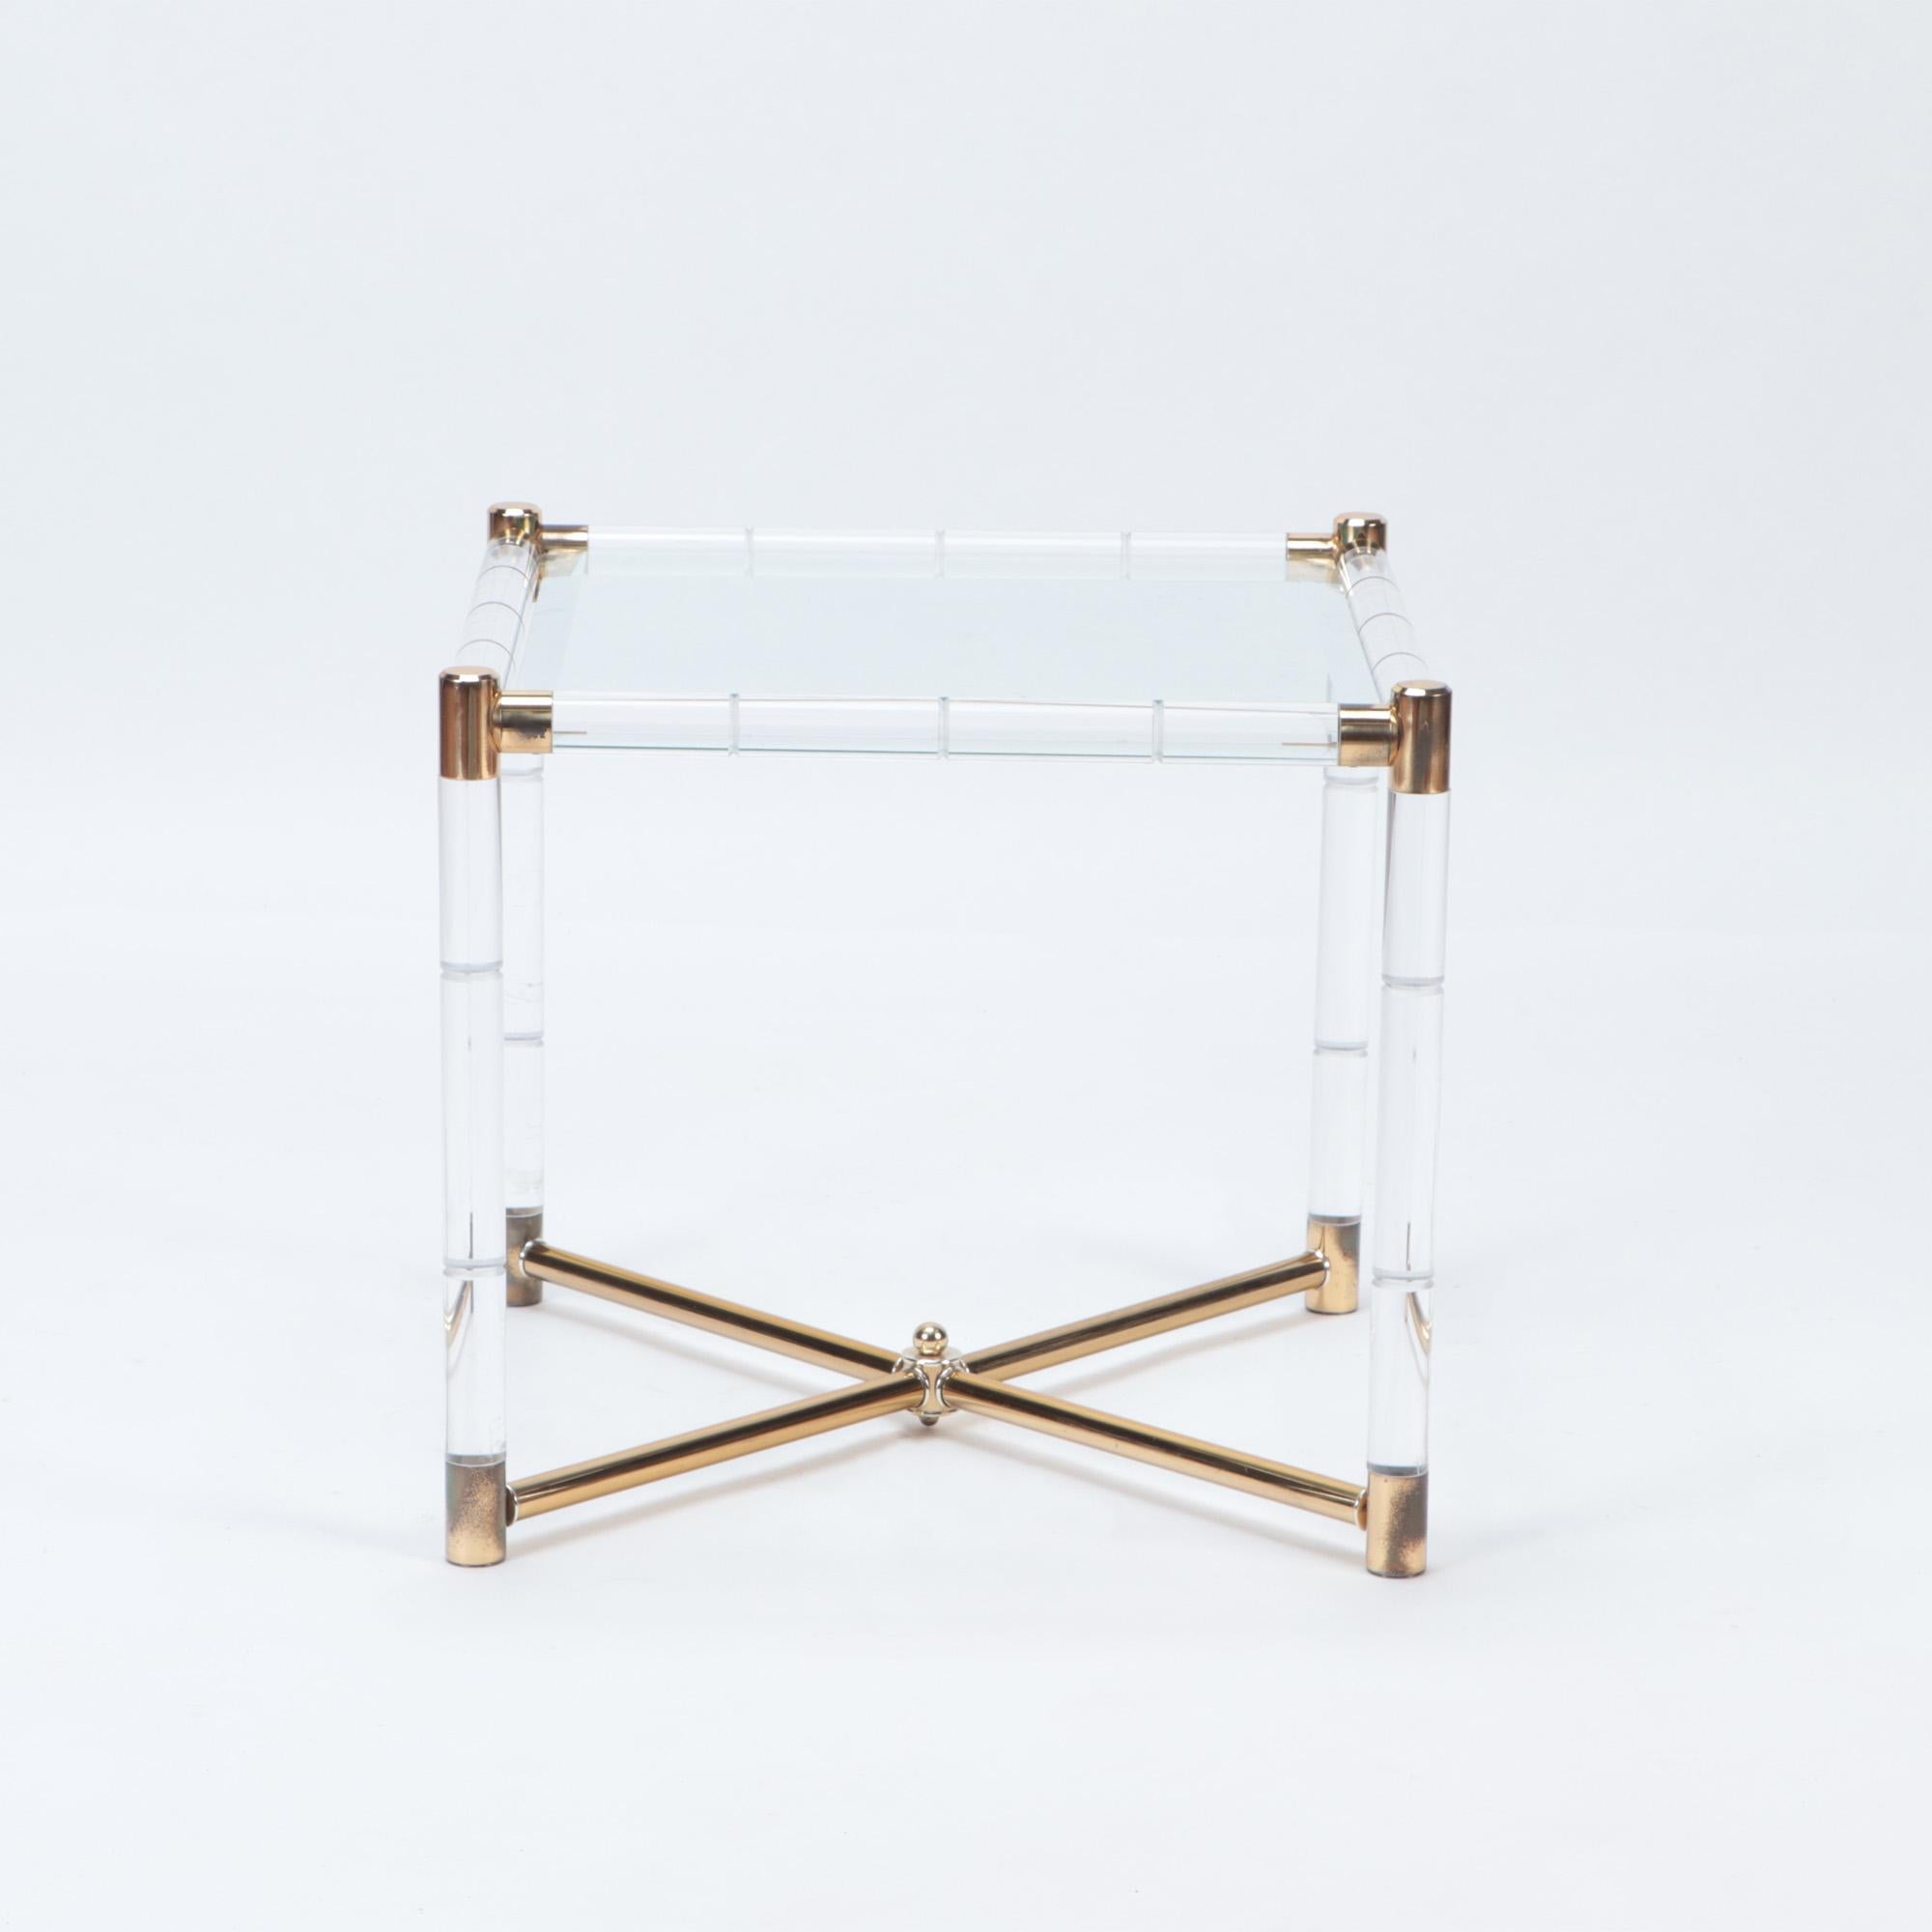 A Mid-Century Modern Charles Hollis Jones designed end table, 1950s. Lucite with brass corner bracket joints and X base.